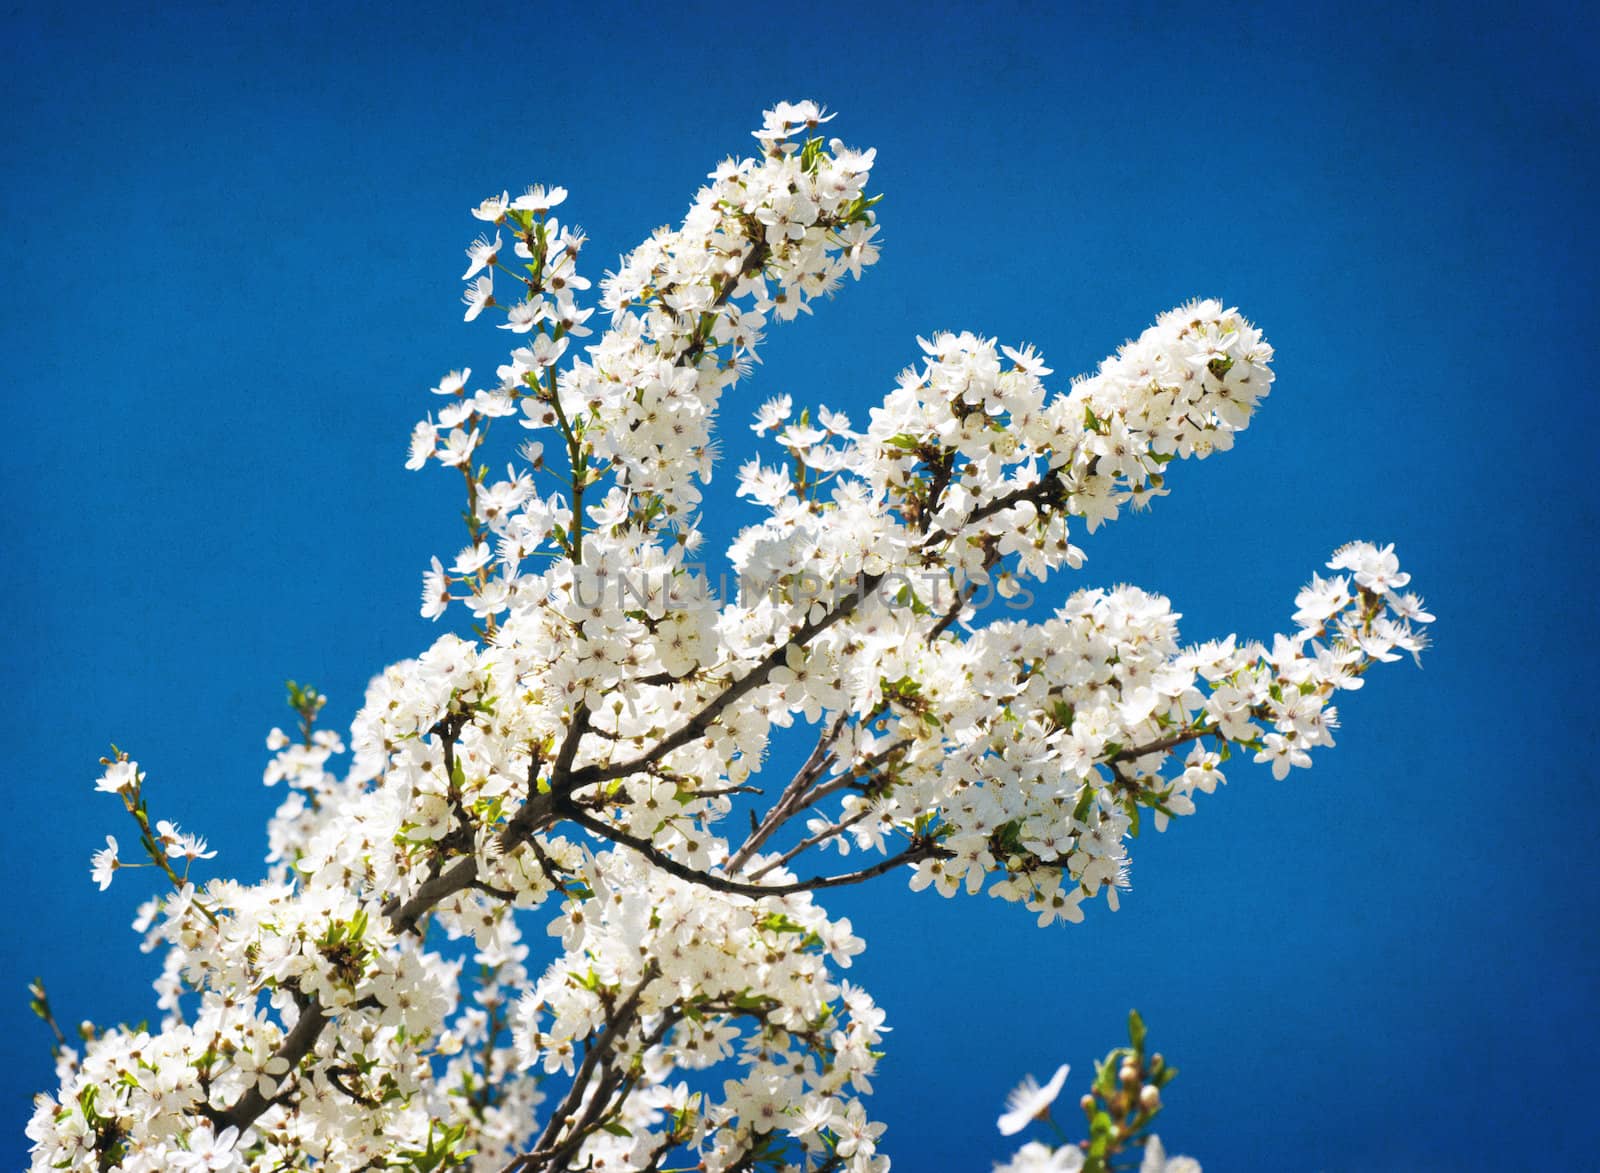 spring flowering tree on blue textured sky by Zhukow